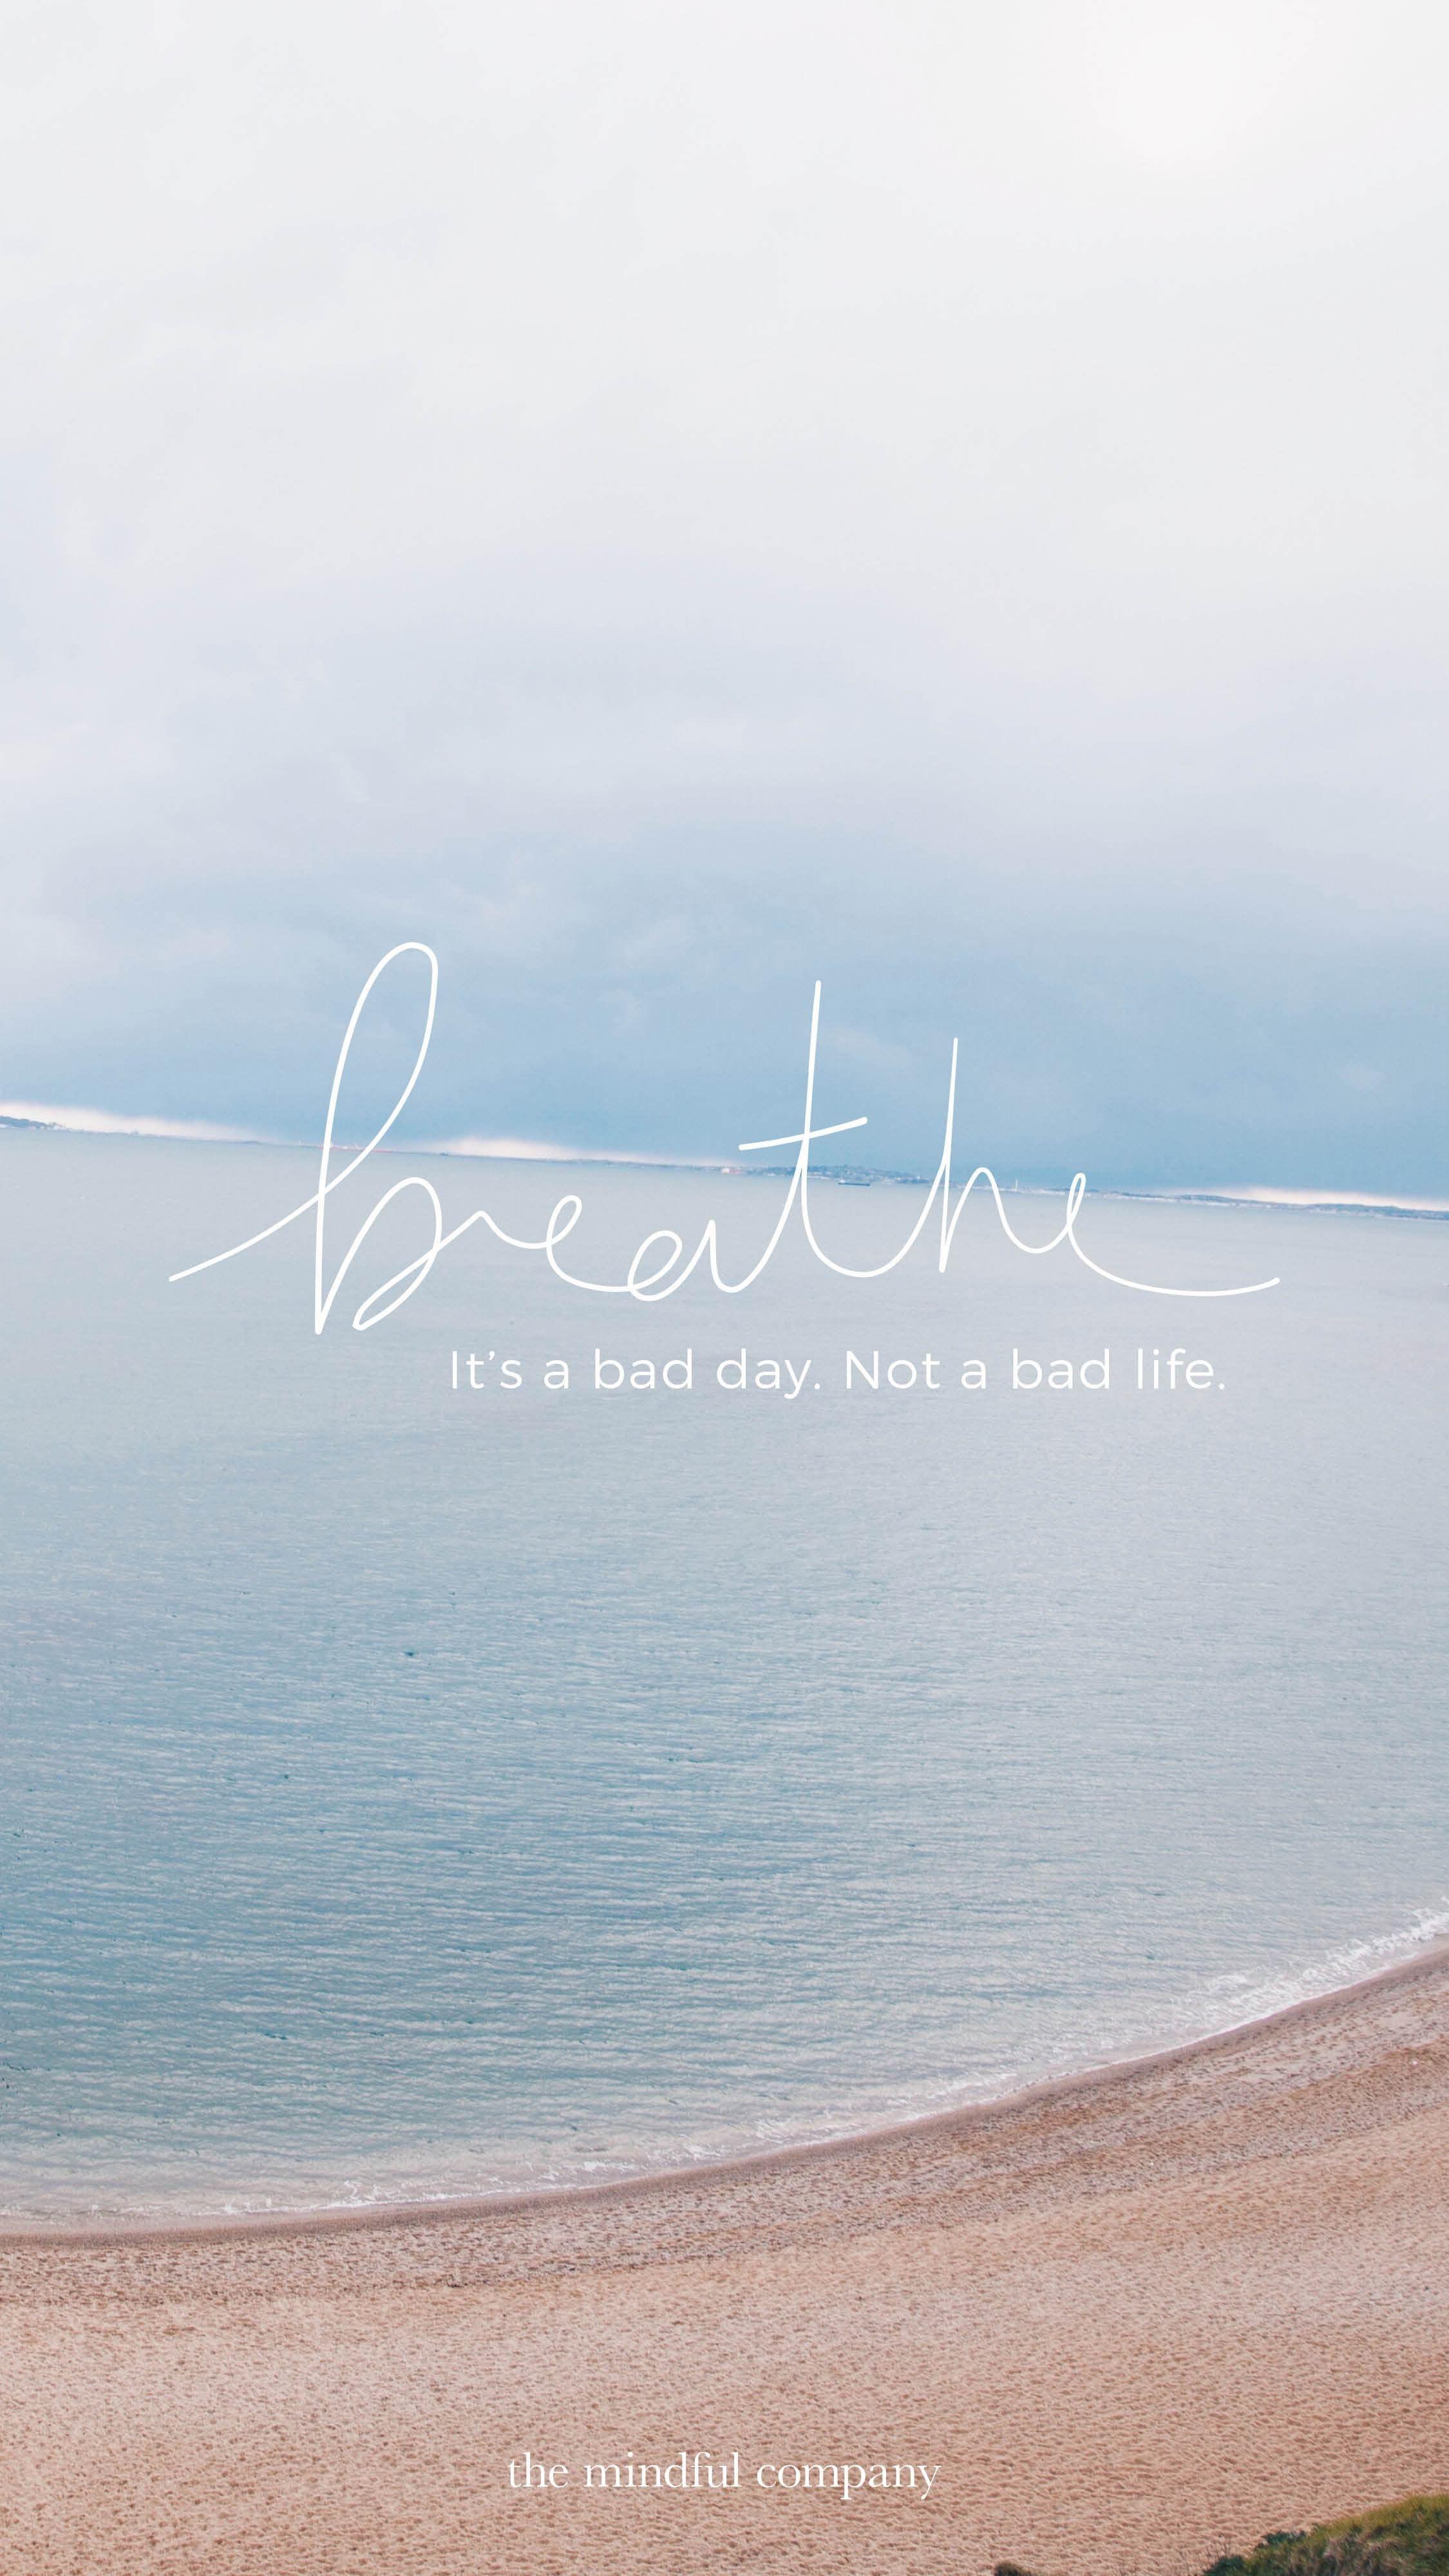 Wallpaper of the month: Breathe